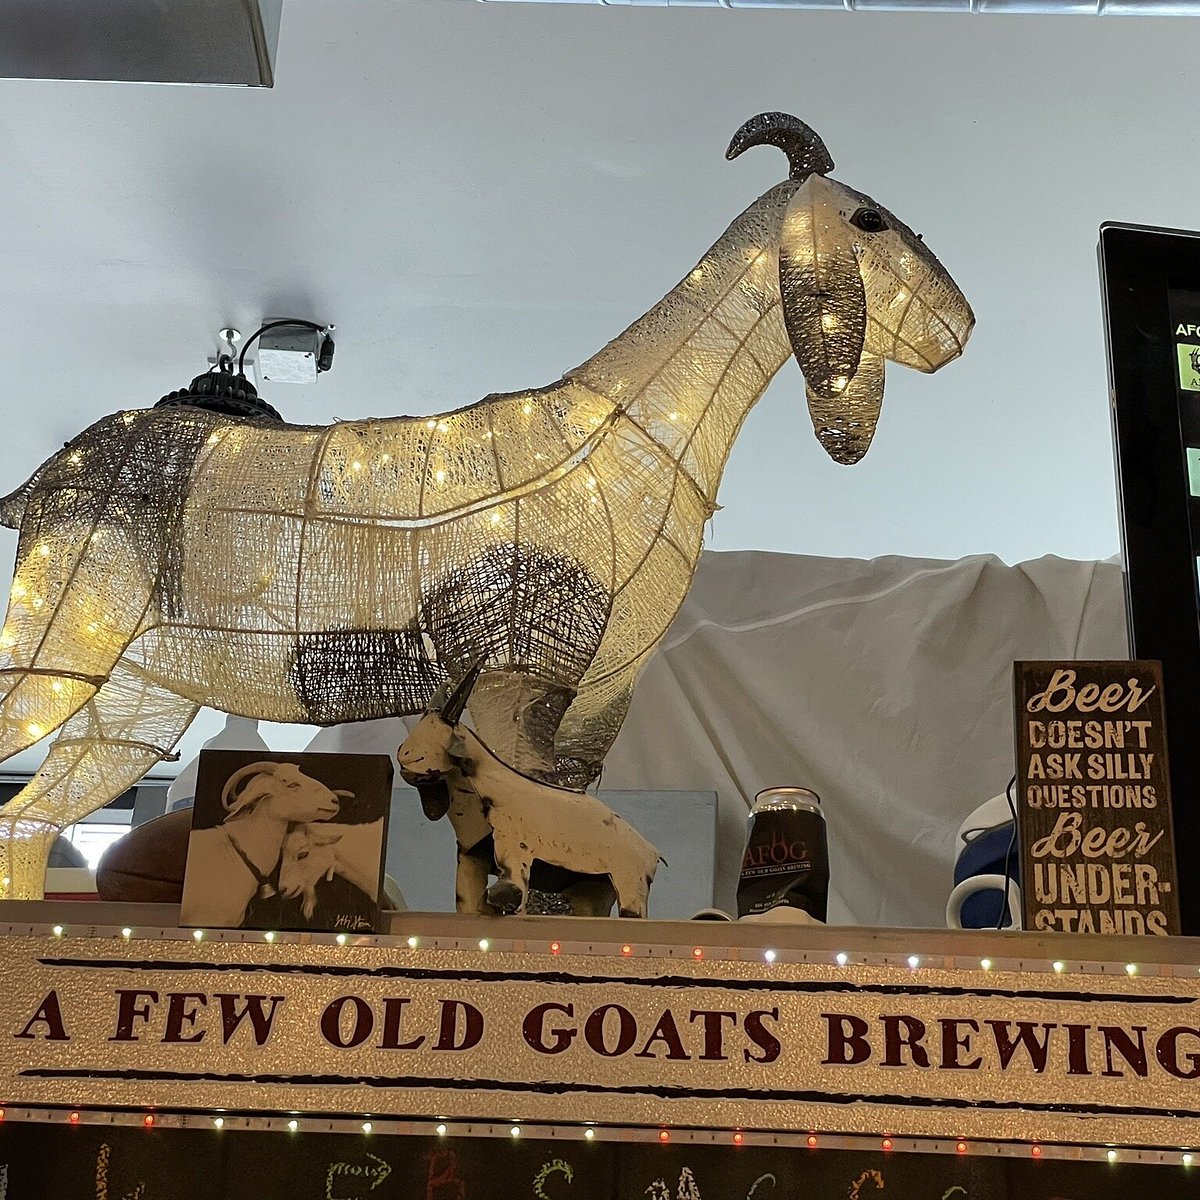 A FEW OLD GOATS BREWING: All You Need to Know BEFORE You Go (with Photos)